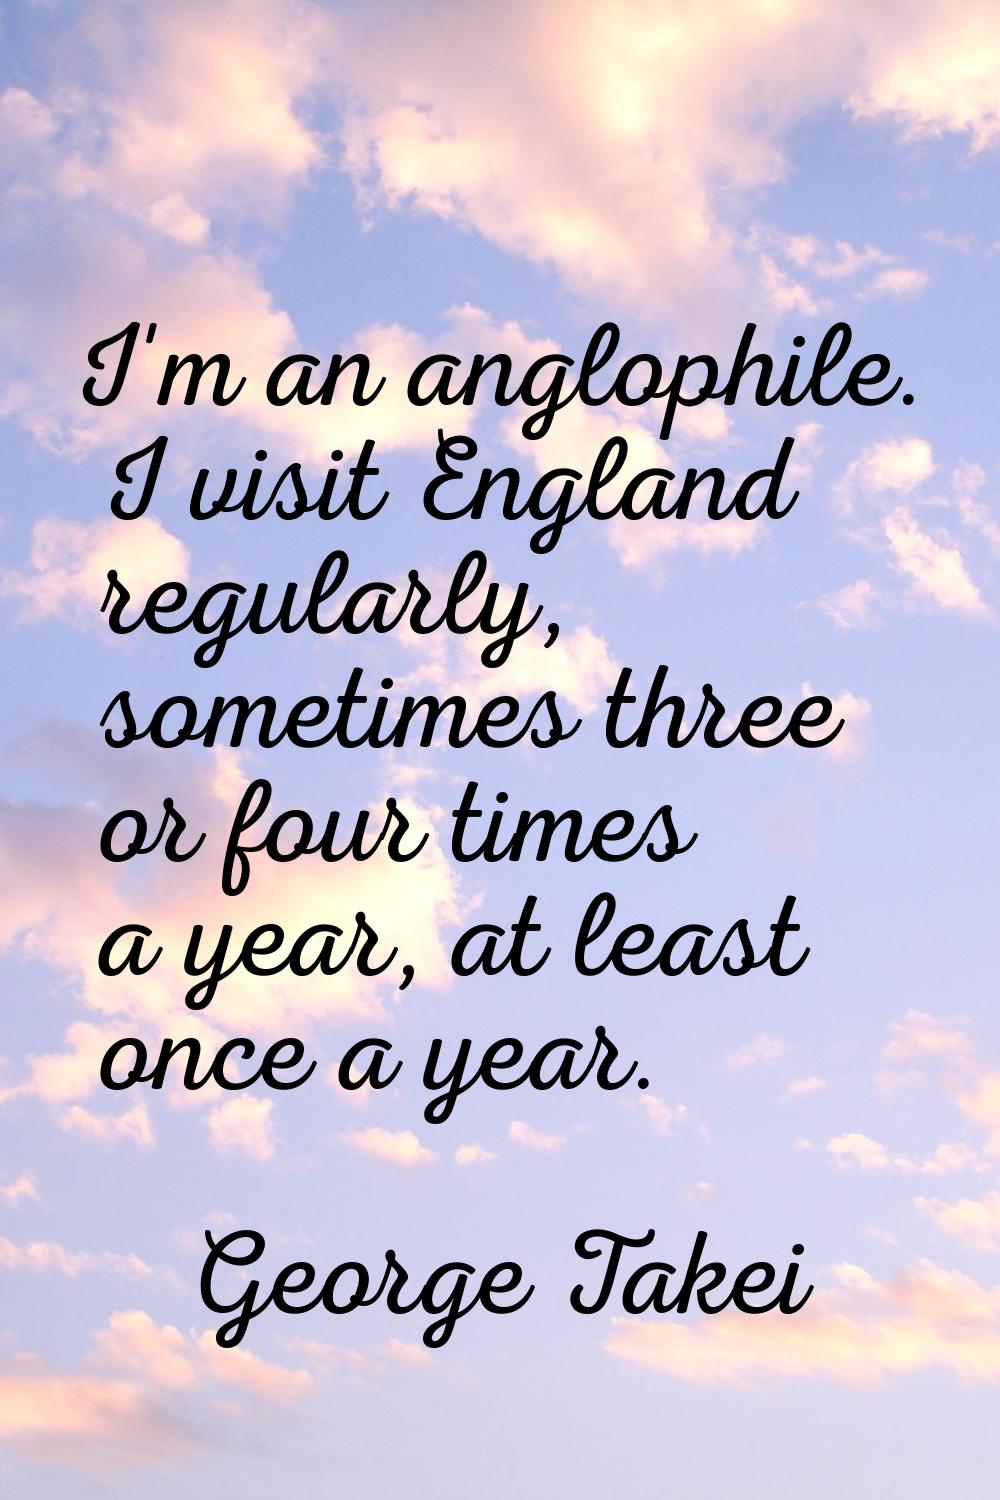 I'm an anglophile. I visit England regularly, sometimes three or four times a year, at least once a